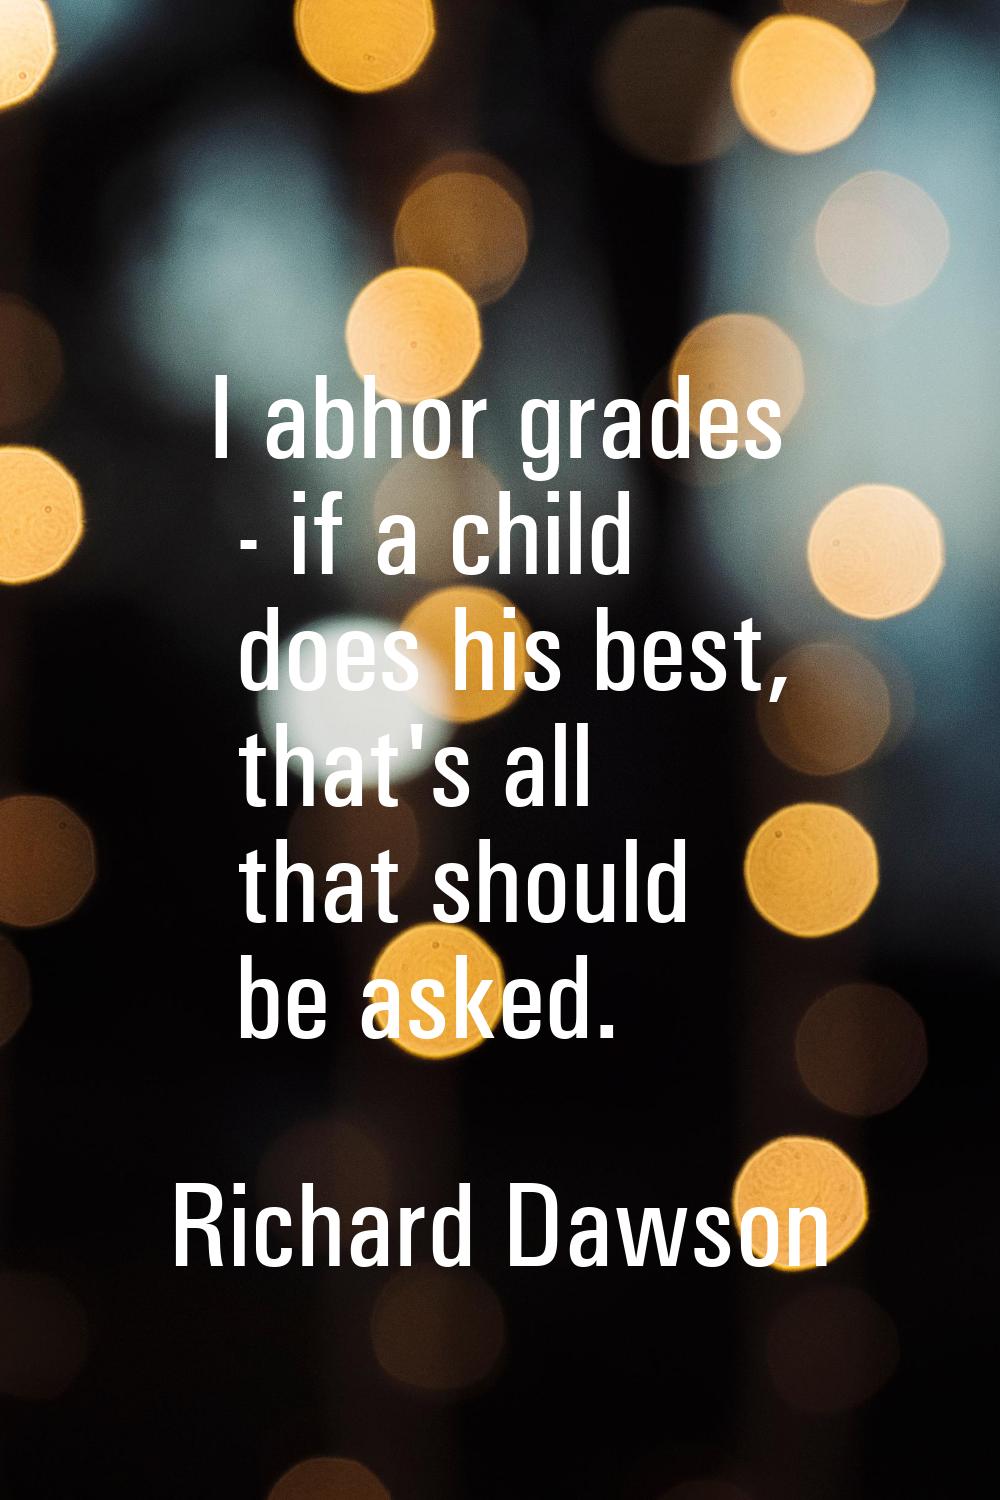 I abhor grades - if a child does his best, that's all that should be asked.